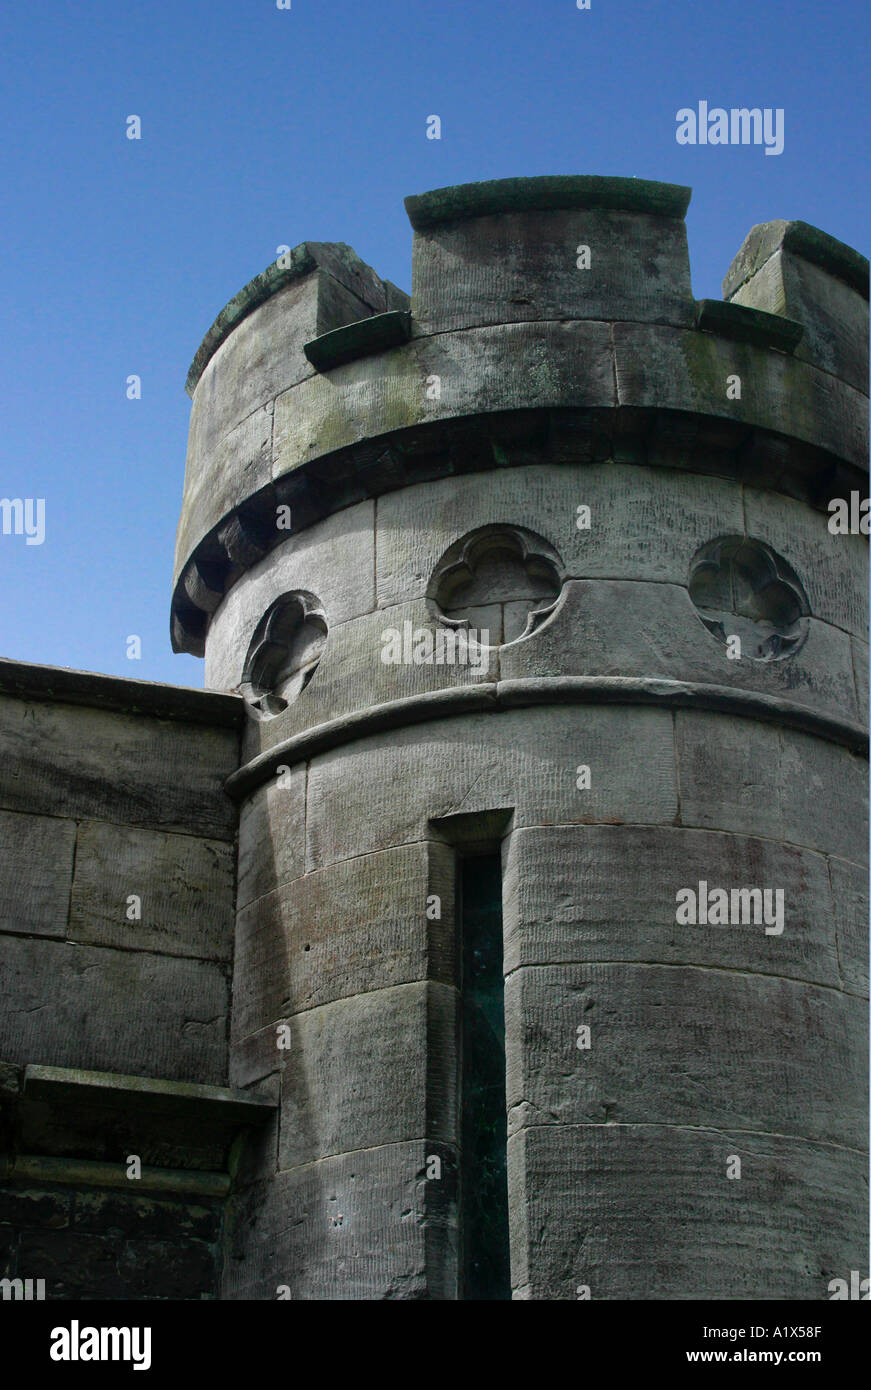 Castellated turret detail Stock Photo